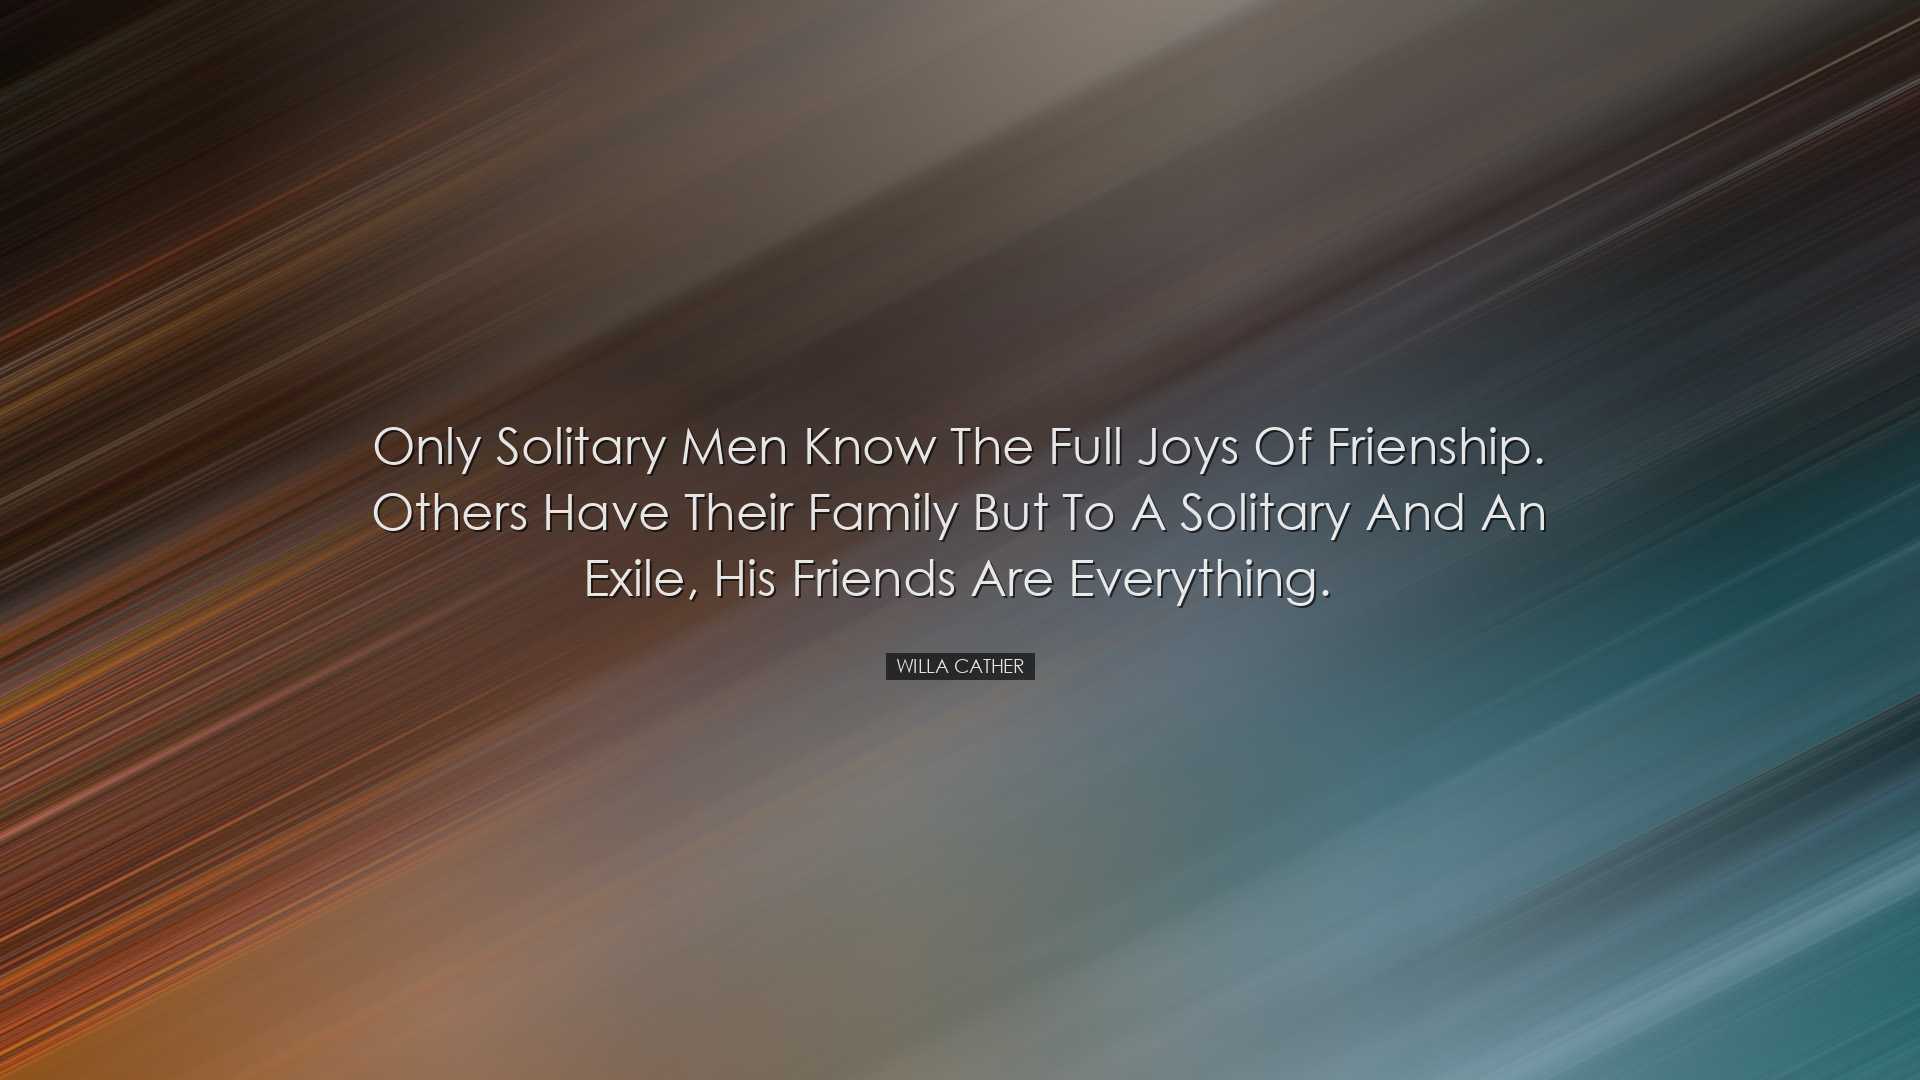 Only solitary men know the full joys of frienship. Others have the